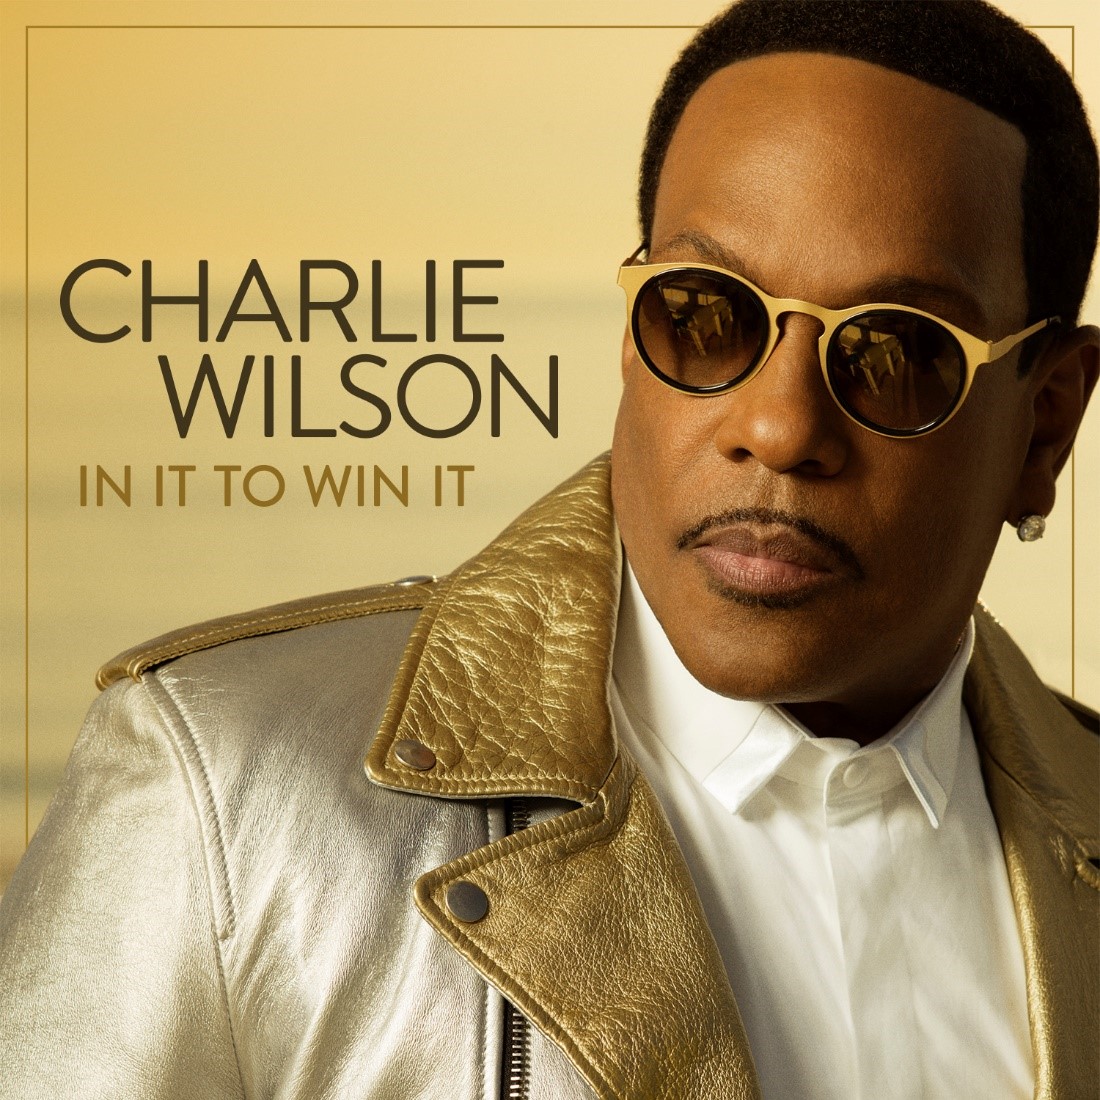 Charlie Wilson In It to Win It Album Cover